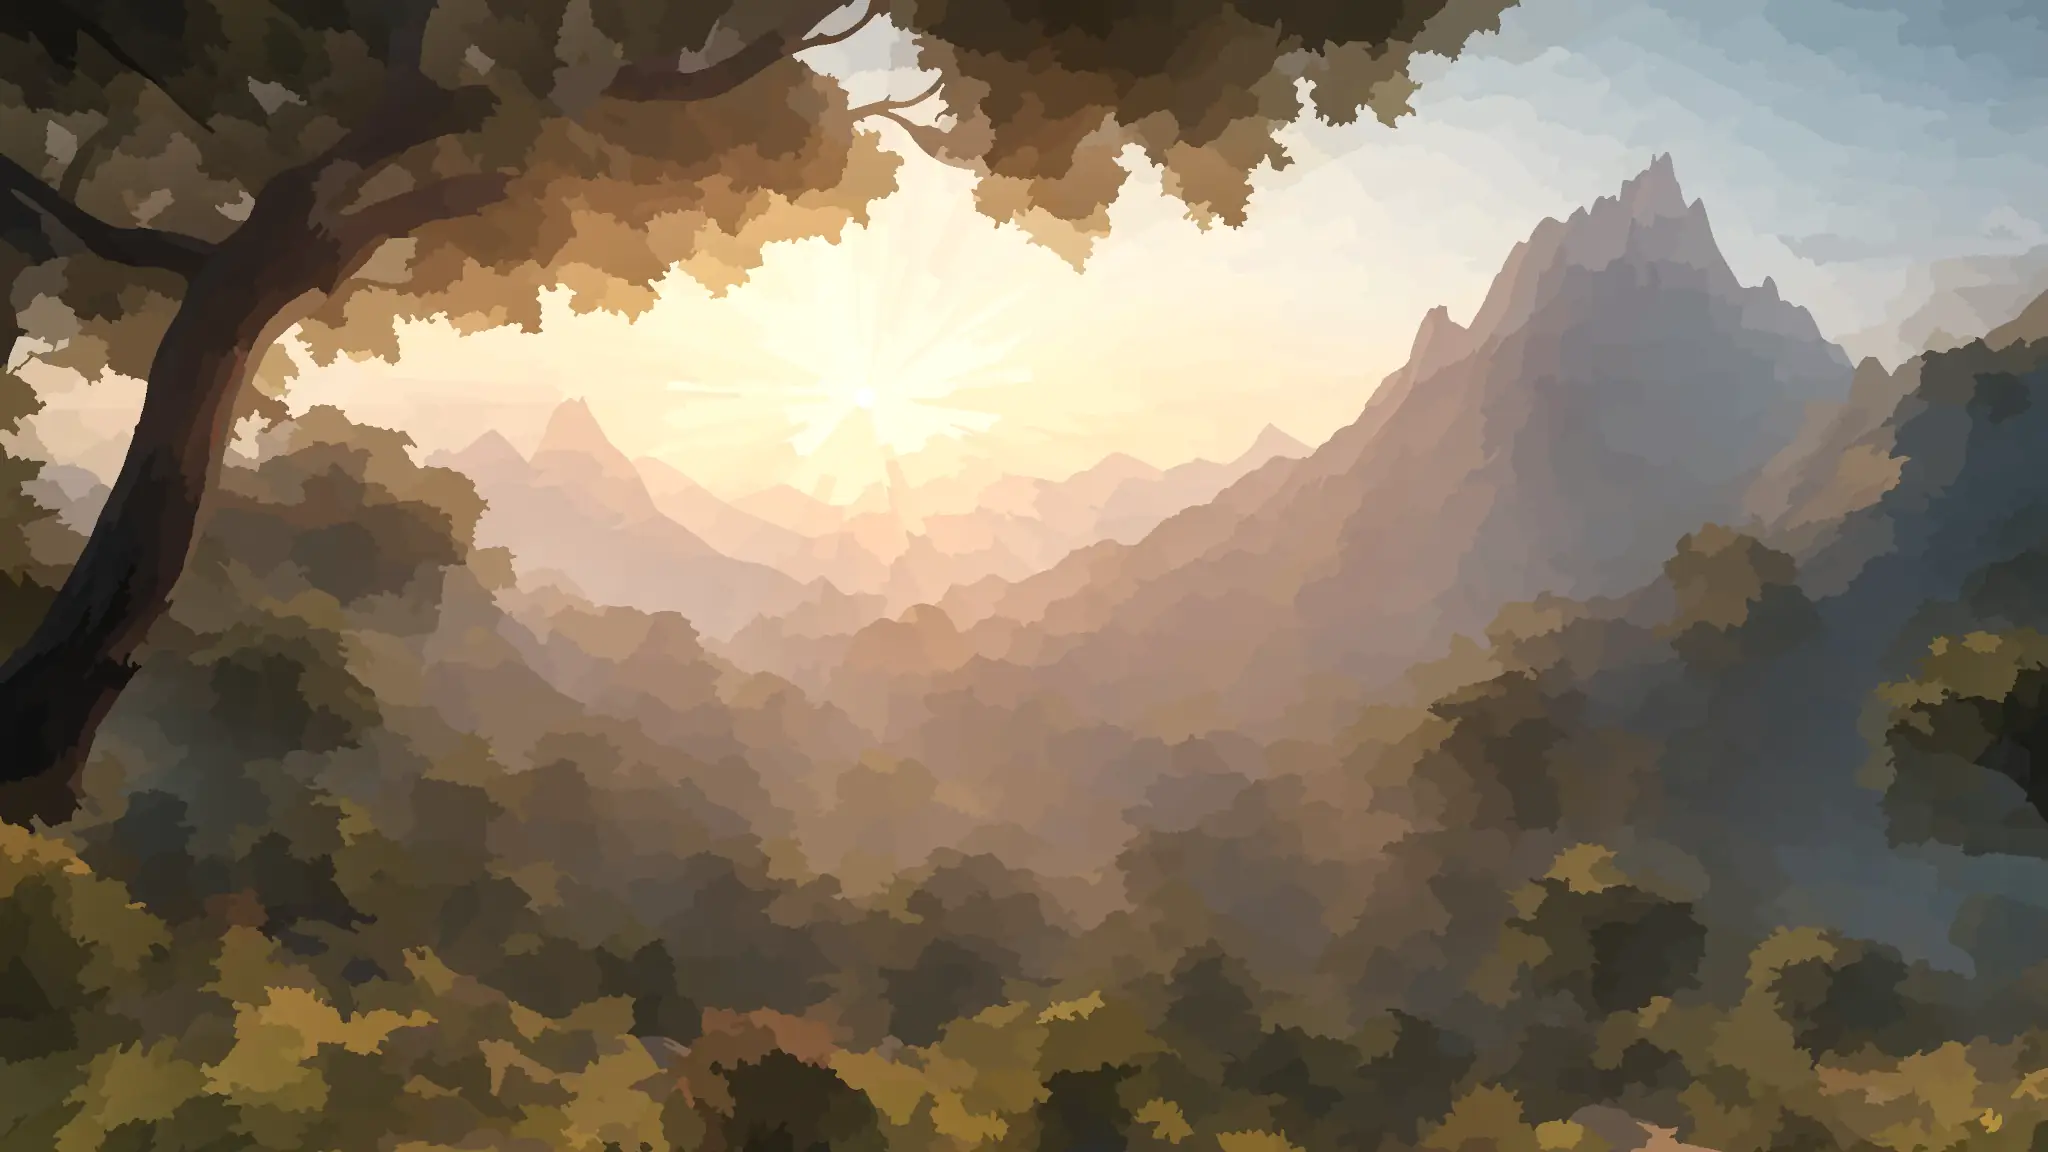 The sun rising over distant mountains. There is a tree and shrubs in the foreground. In the style of watercolors.